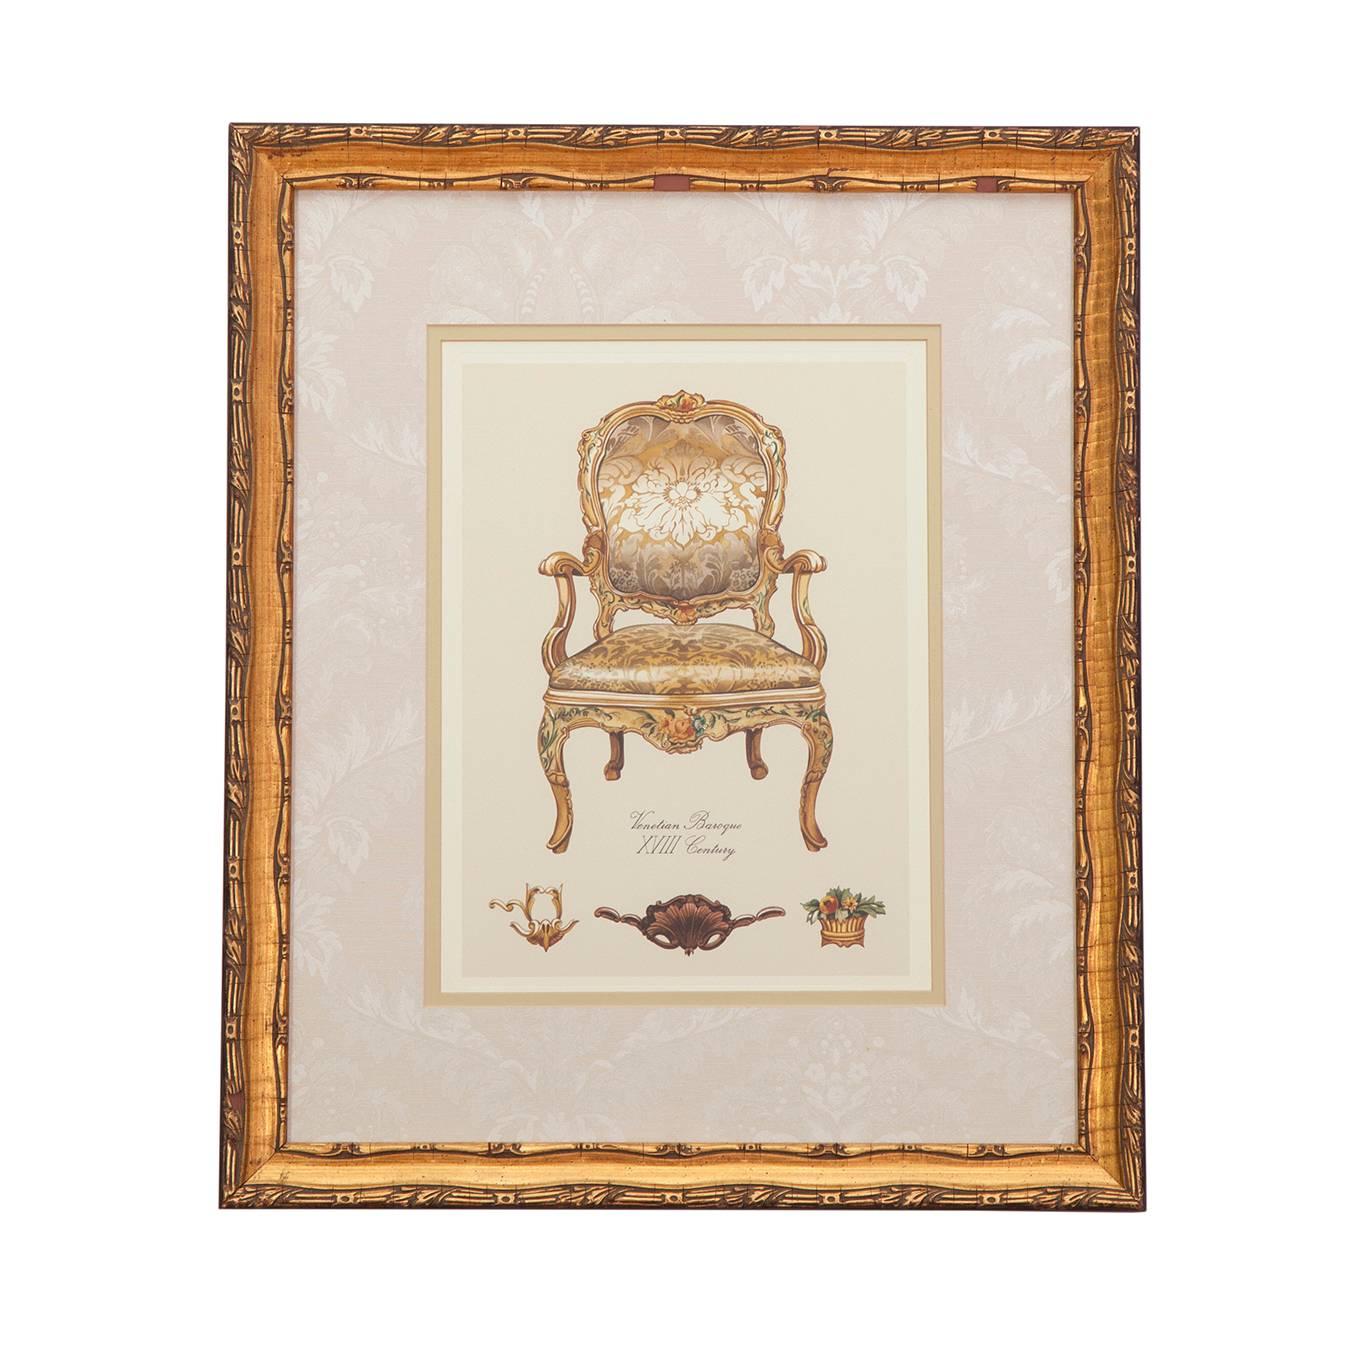 19th century French chair paintings, set of four.